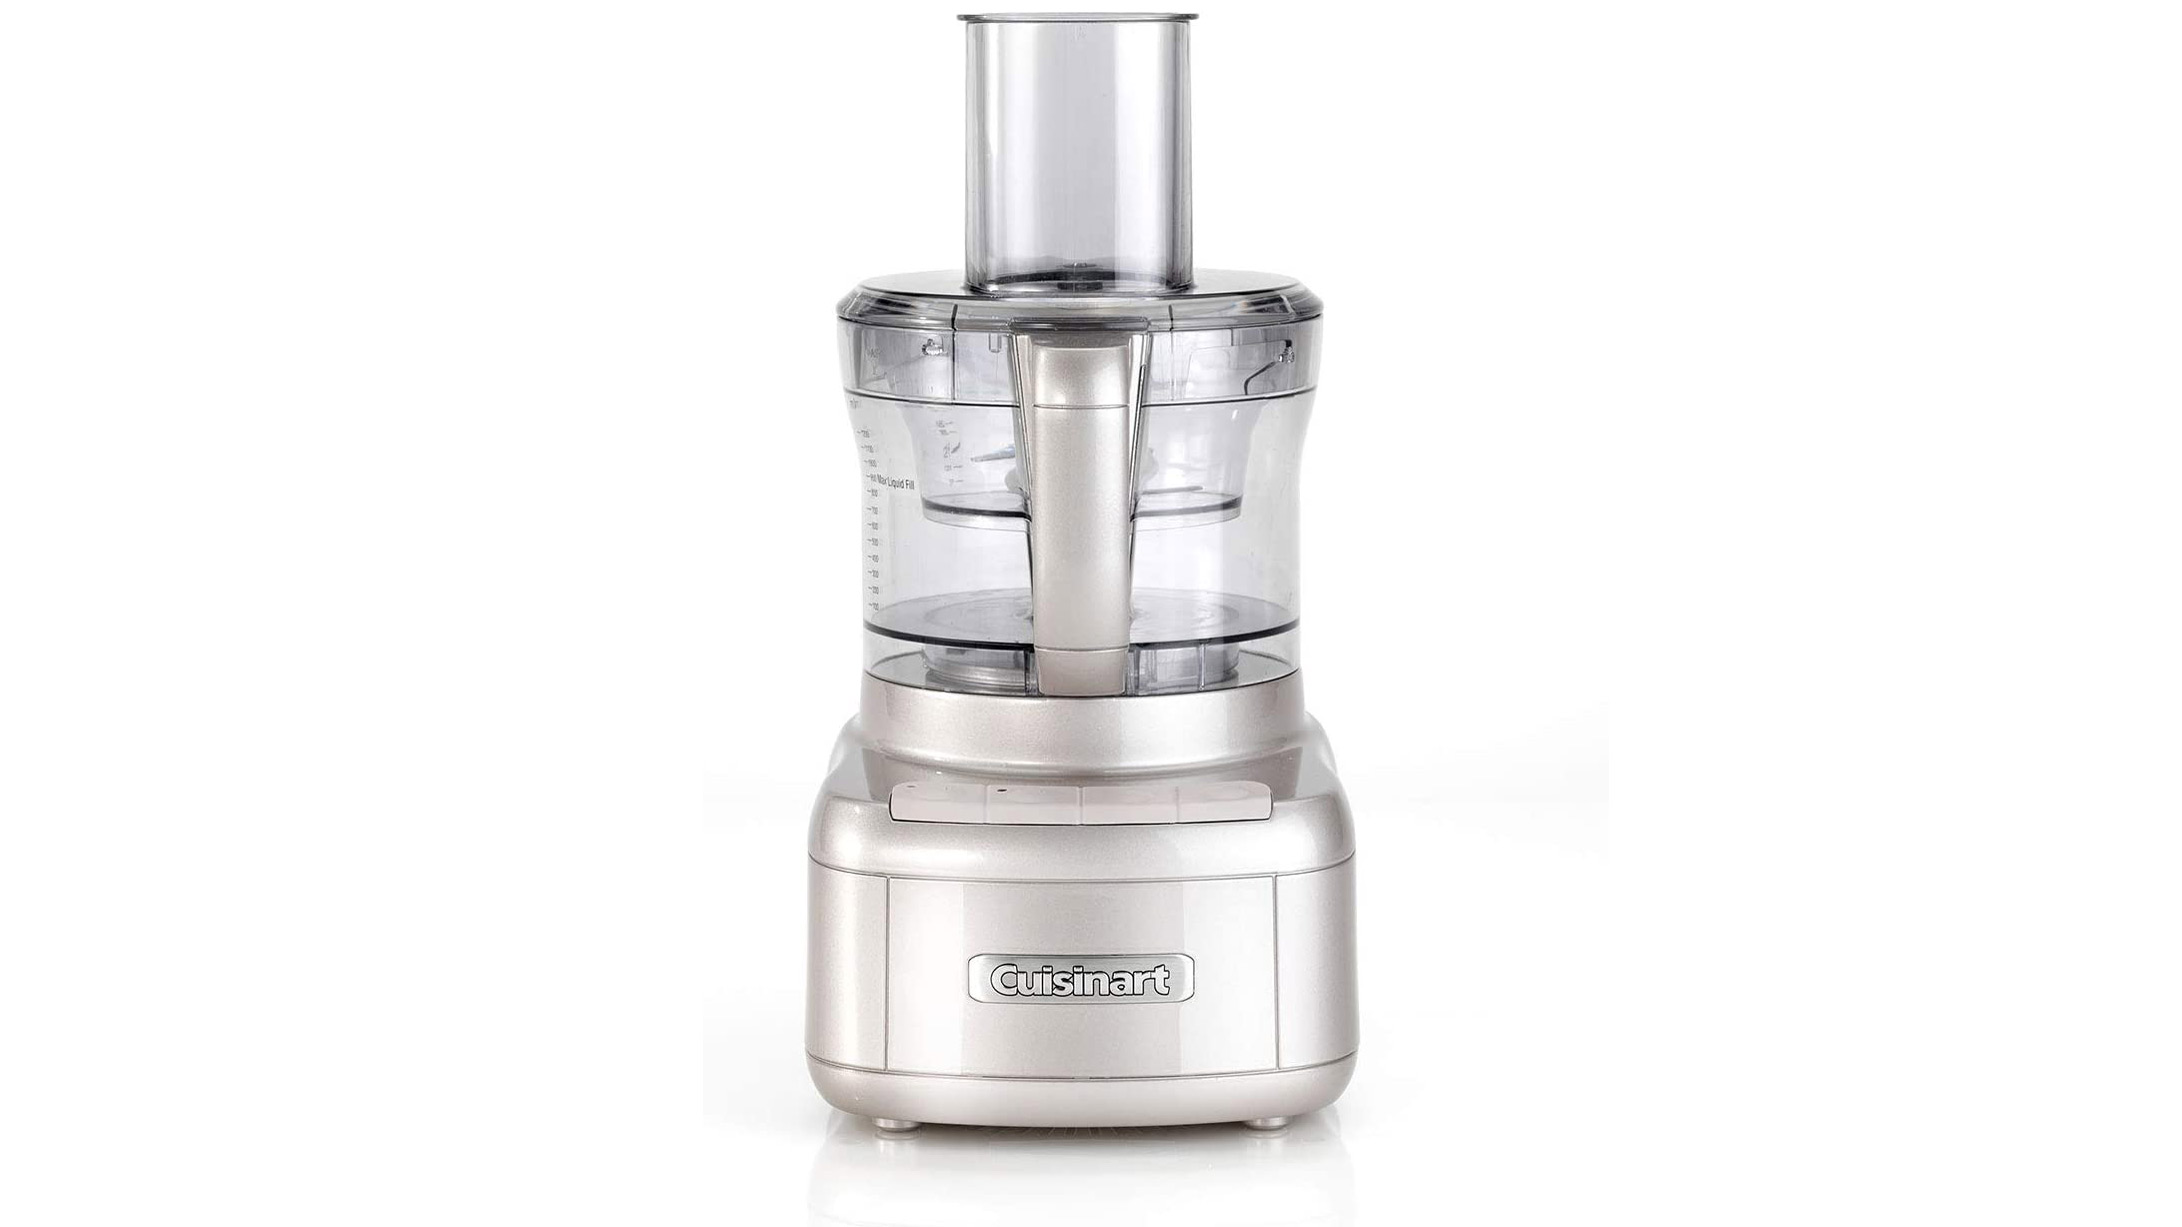 The Cuisinart Prep Pro FP8 best food processor on a white background